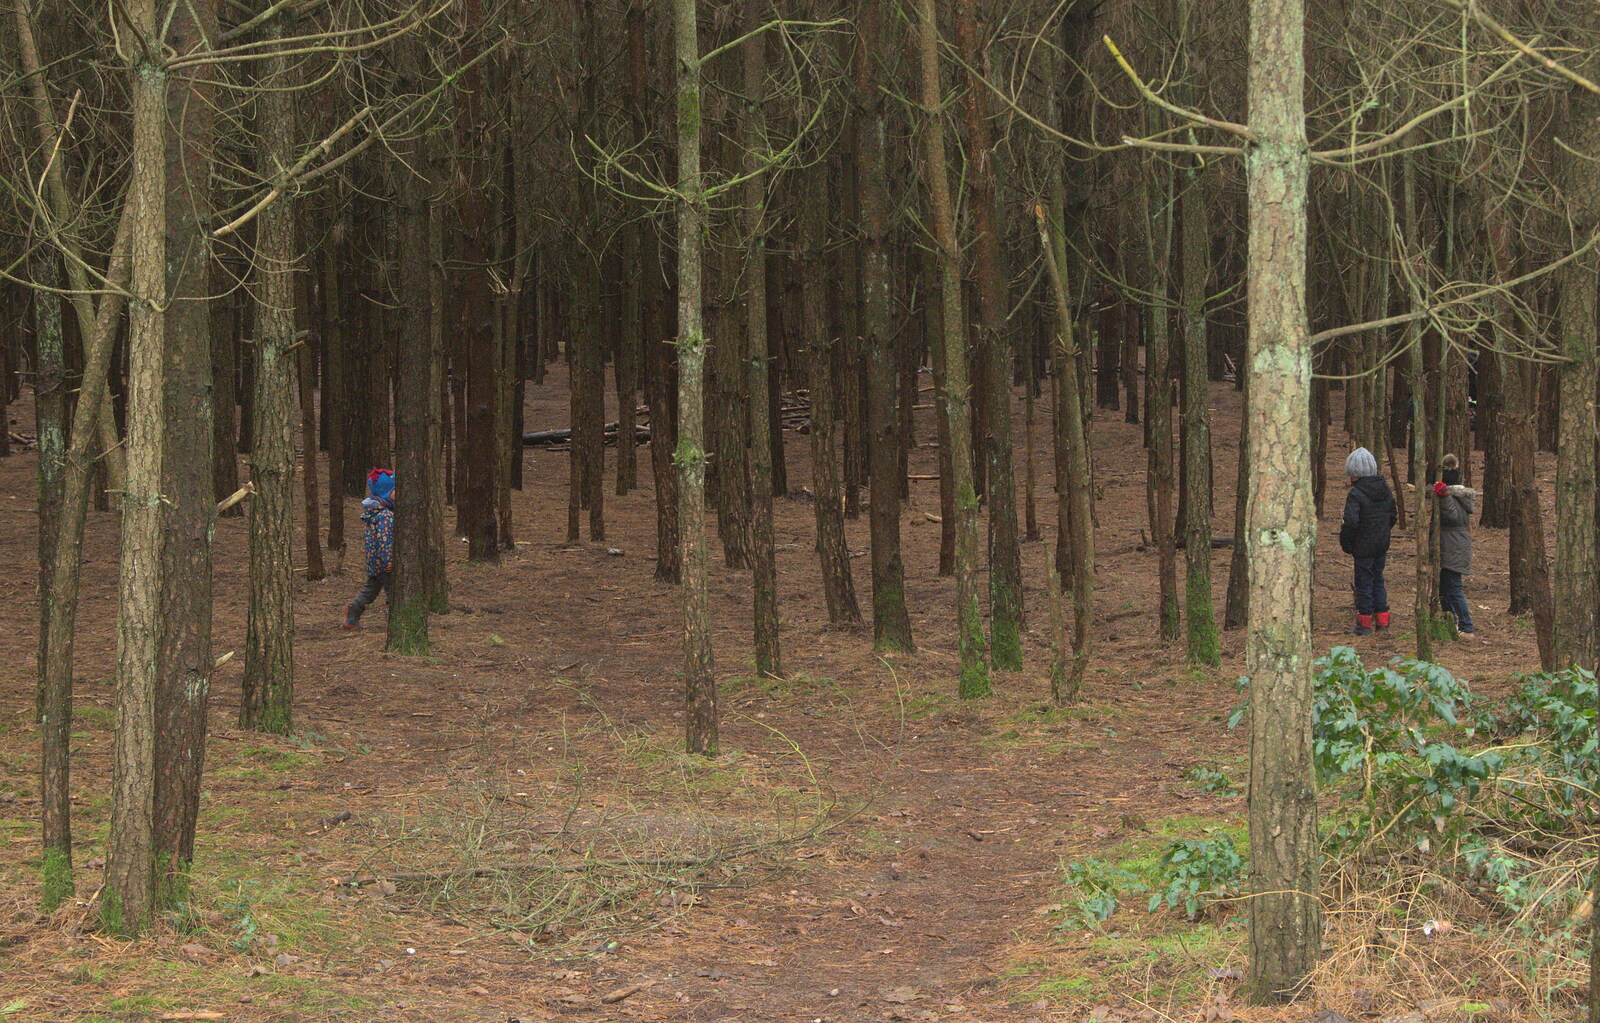 The children run off into the woods from A Day at High Lodge, Brandon, Suffolk - 3rd January 2017